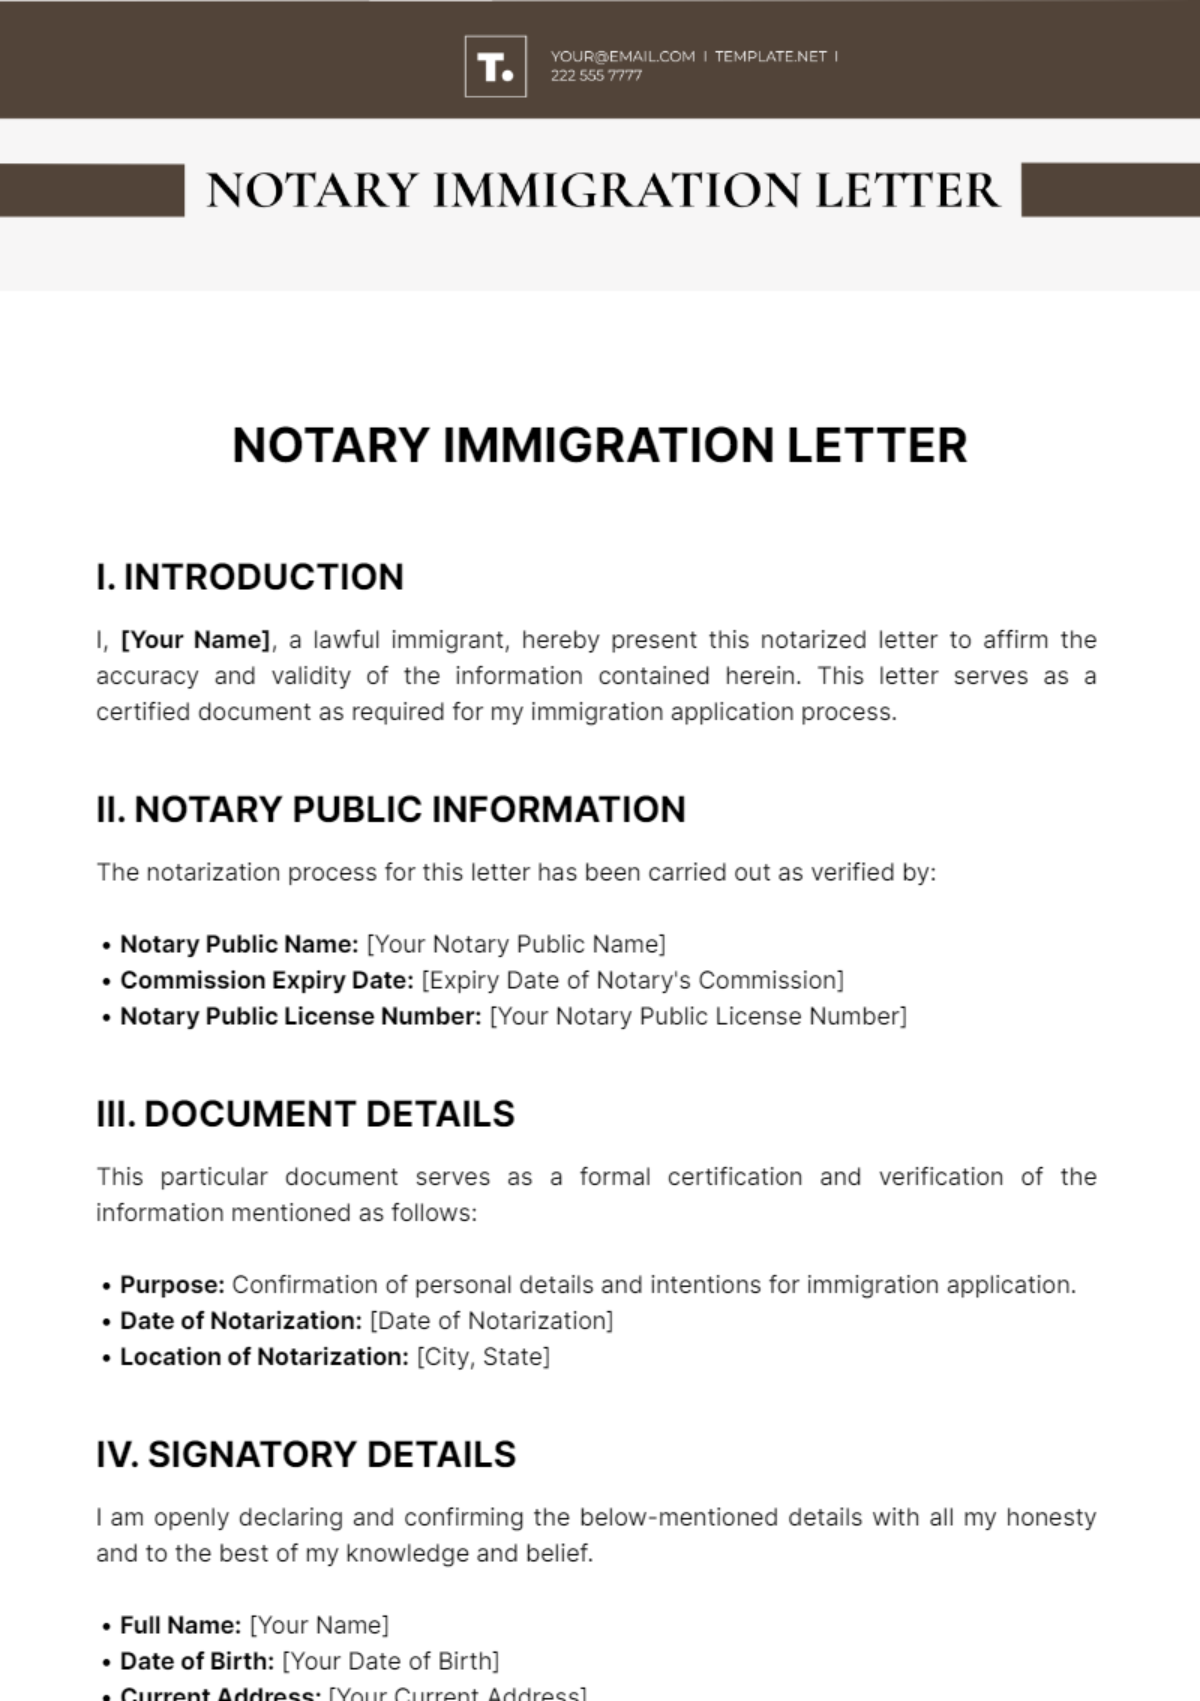 Free Notary Immigration Letter Template